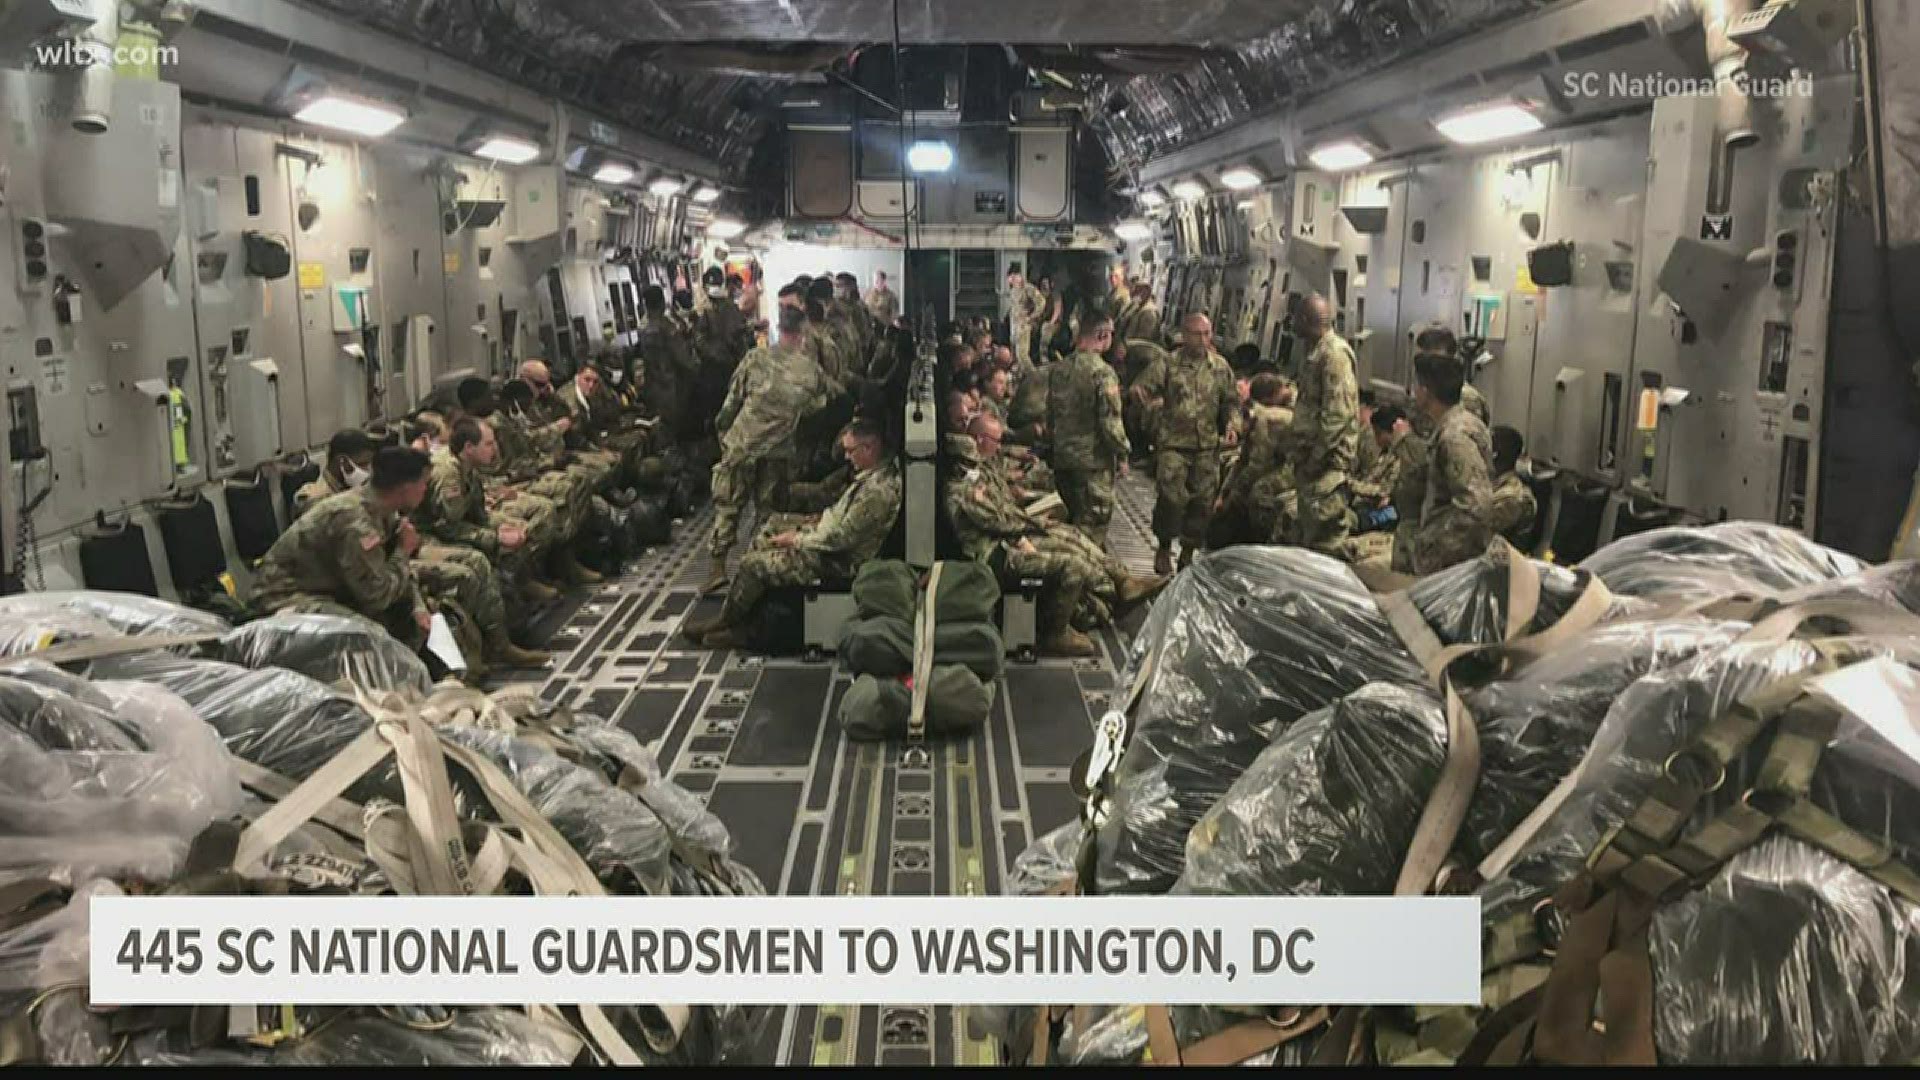 President Trump has called up South Carolina's National Guard to help keep the peace in Washington, D.C.